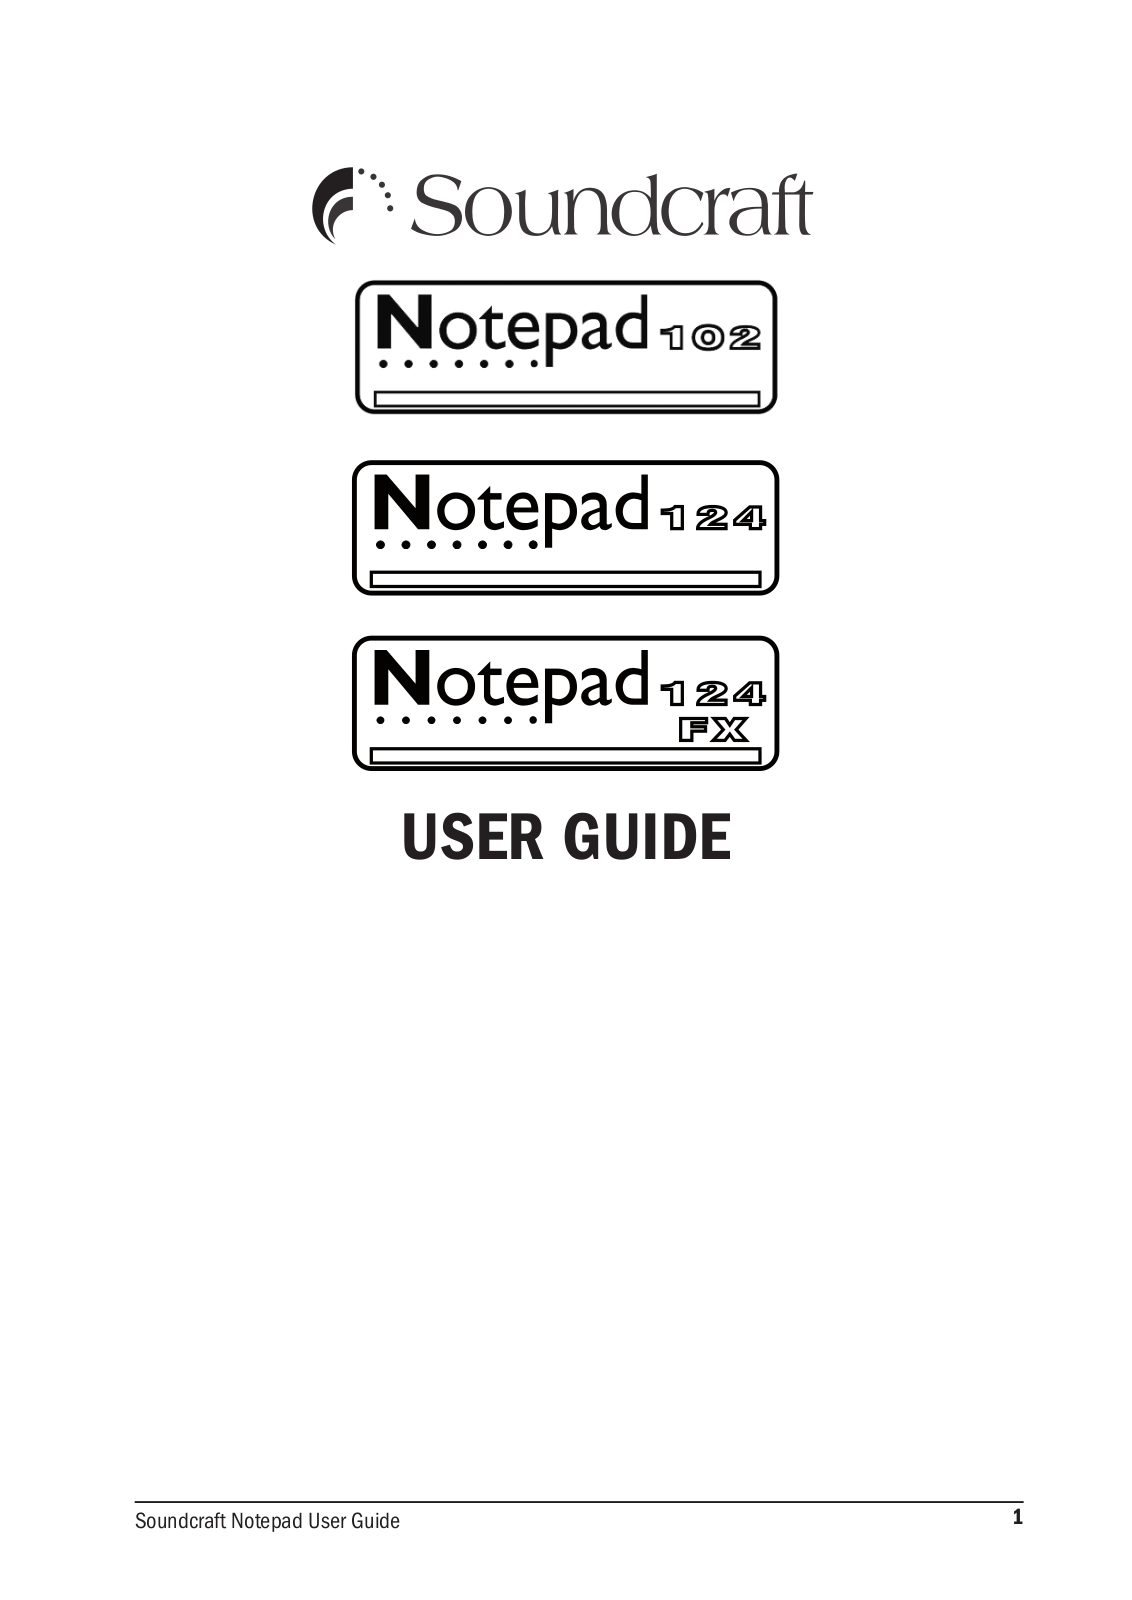 Soundcraft NOTEPAD 102, NOTEPAD 124, NOTEPAD 124 FX USER GUIDE